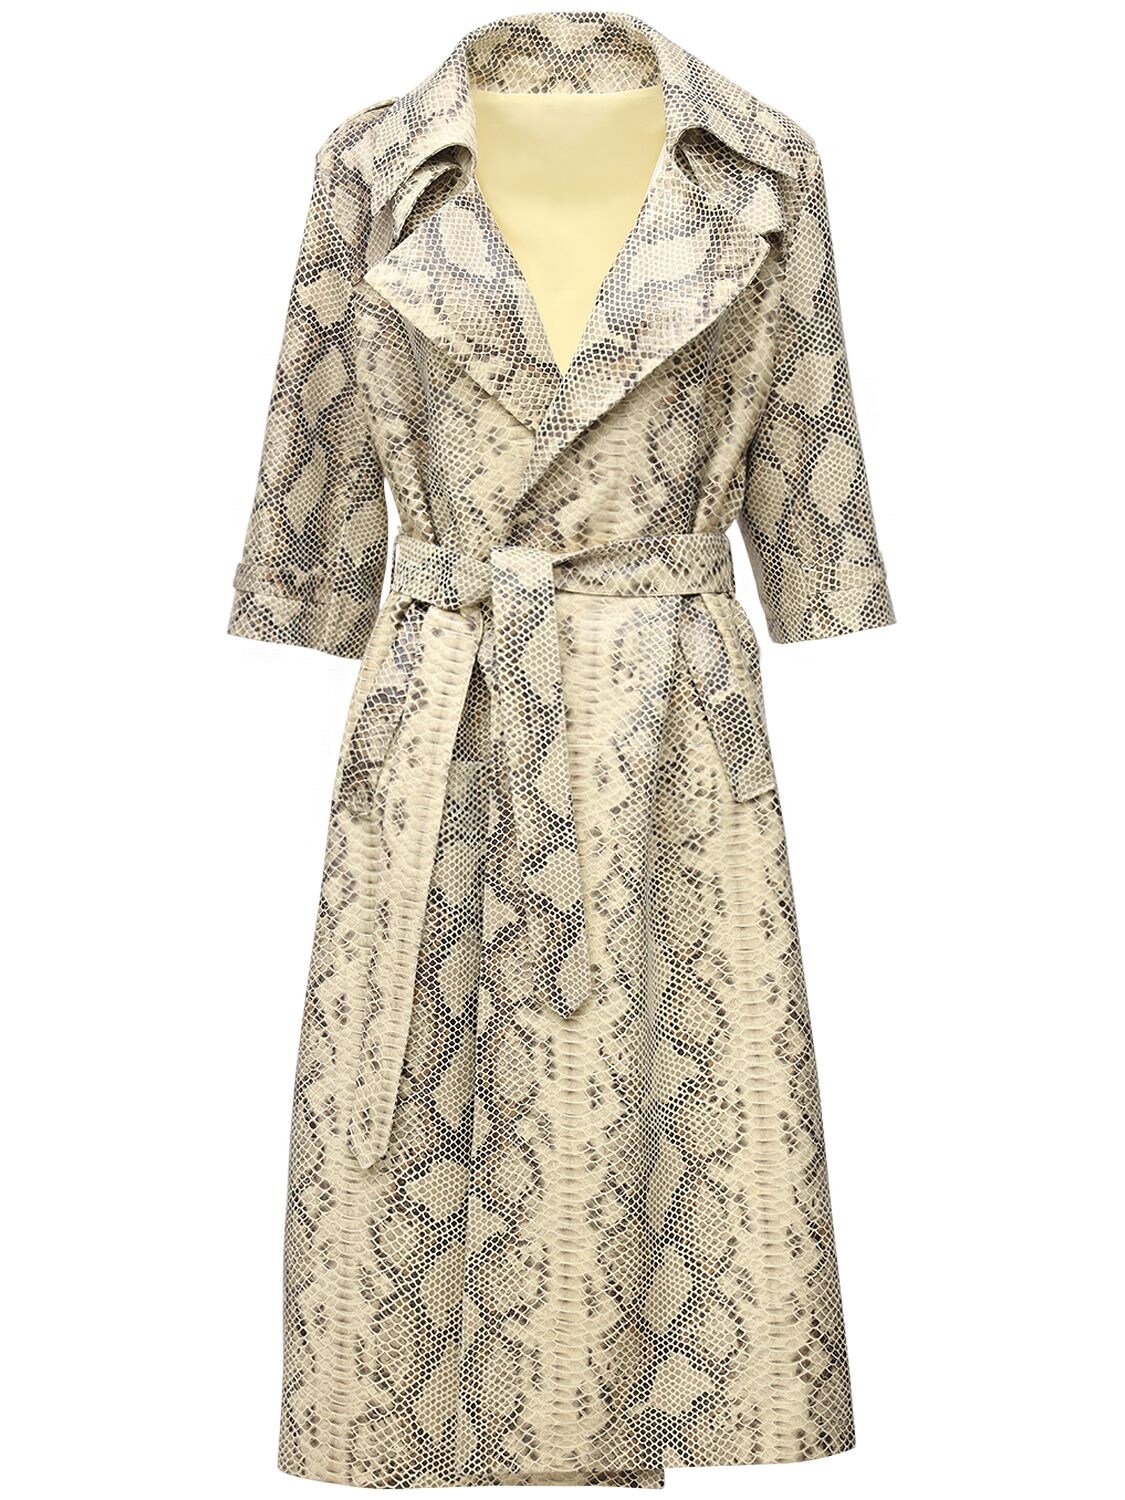 Oversize Snake Print Leather Trench Coat